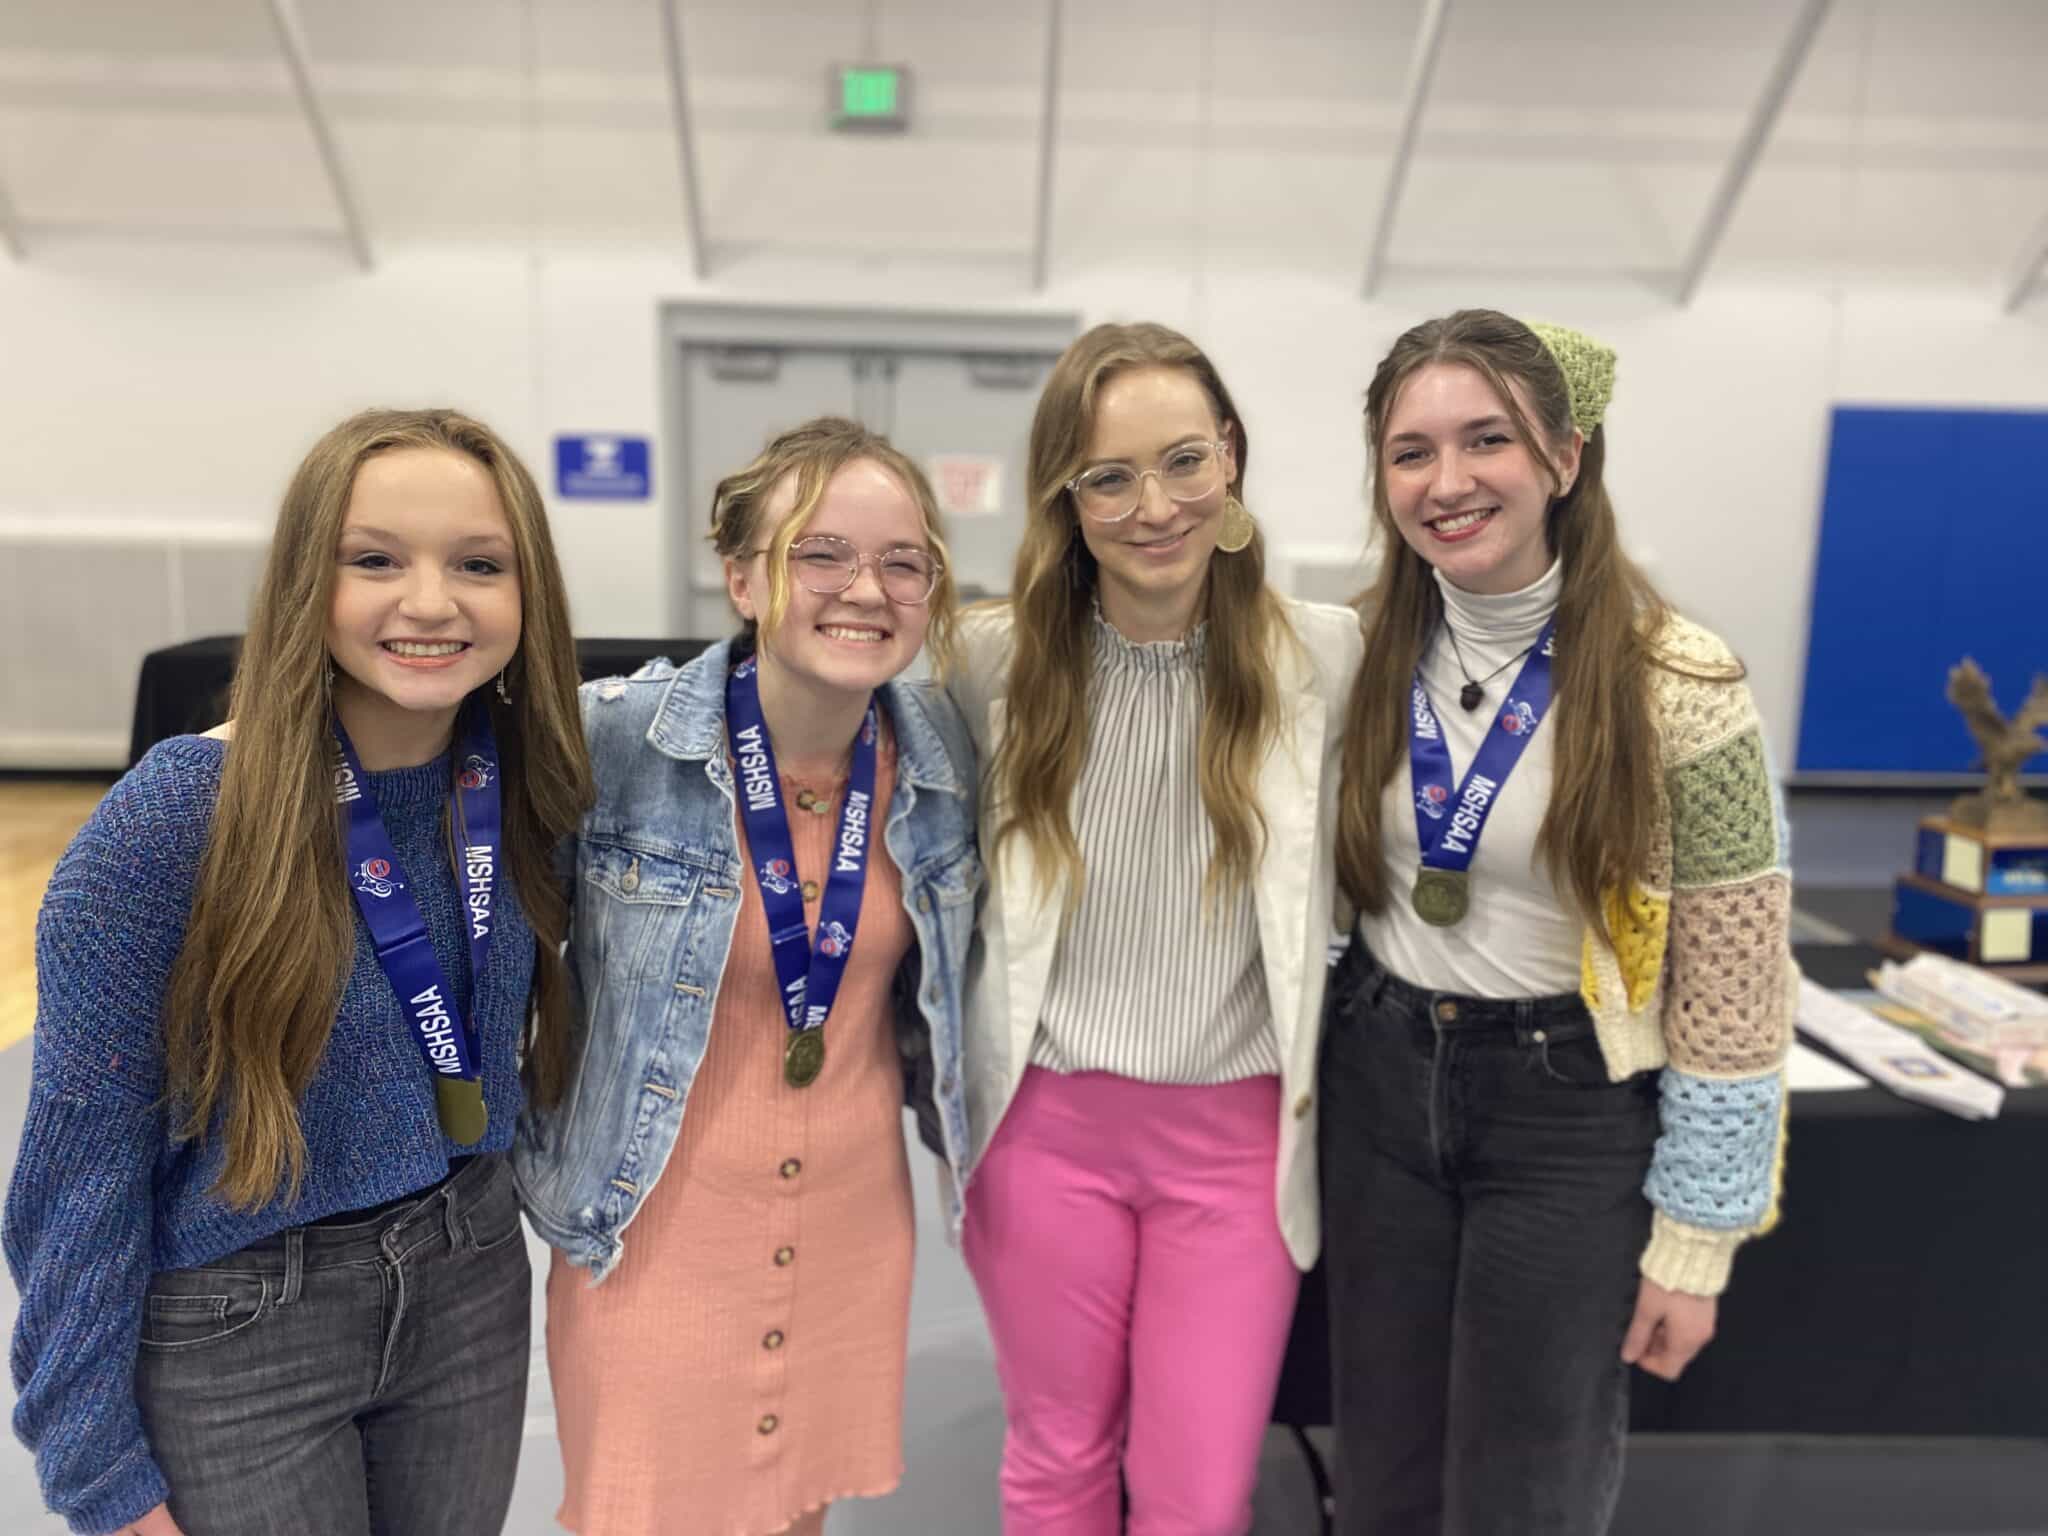 Junior Hannah Wyssmann, sophomore Addison Davies, and senior Shea Rider are pictured with SCA Secondary Vocal Music Director Mrs. Mandy Hoover. Hannah, Addison and Shea earned the highest ranking of gold as soloists at the MSHSAA State Music Festival.